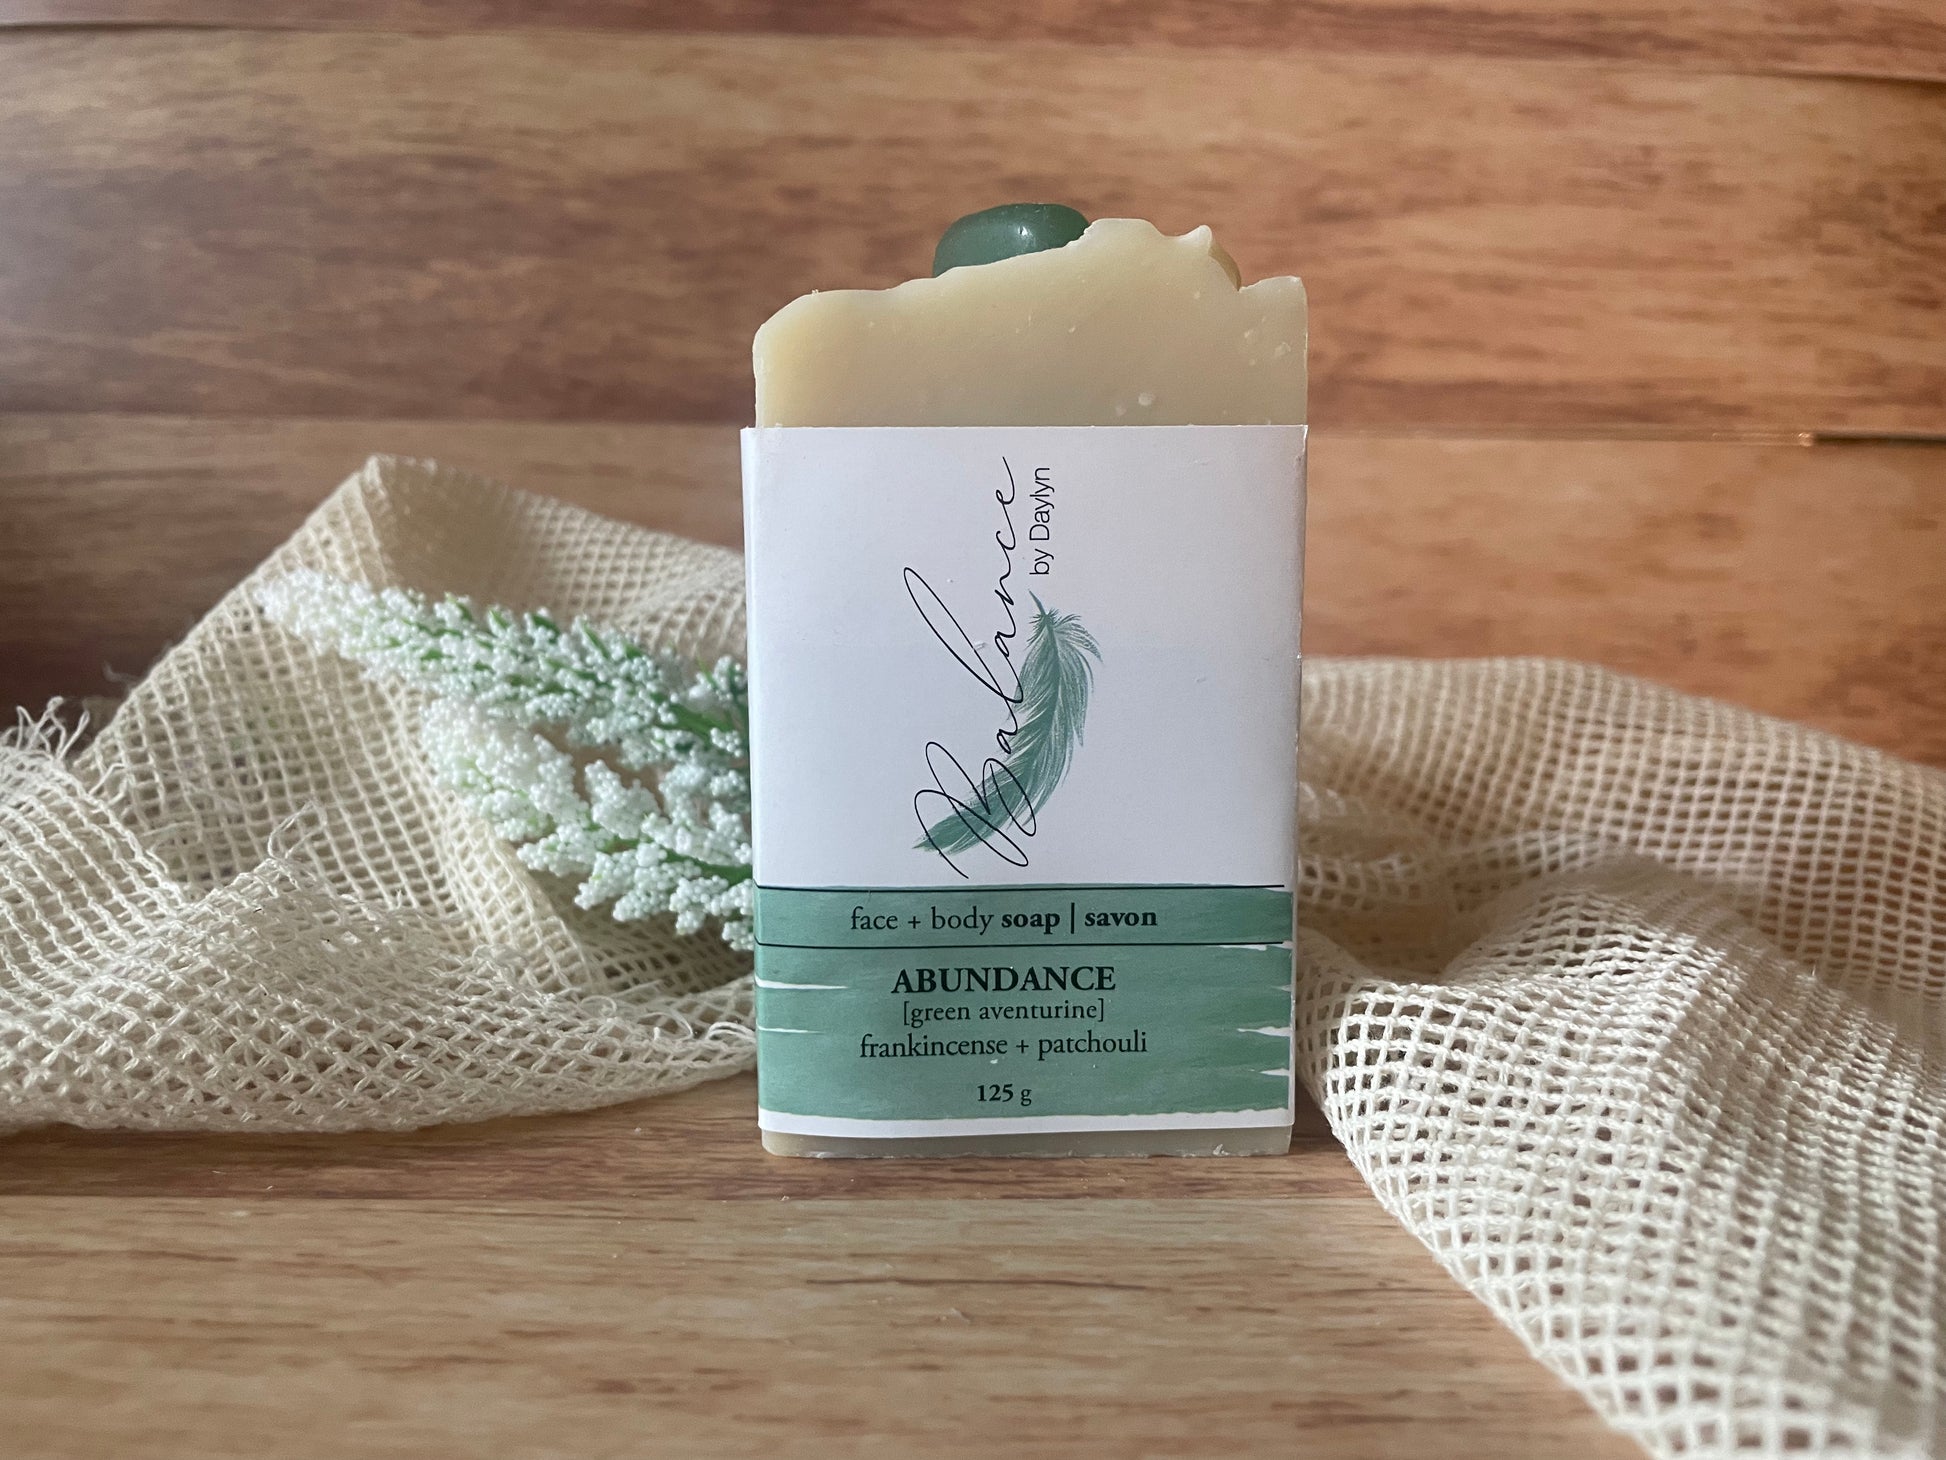 bar soap for face, best face bar soap,  natural soap for sensitive skin,  face and body soap, infused with abundance green aventurine, frankincense and patchouli